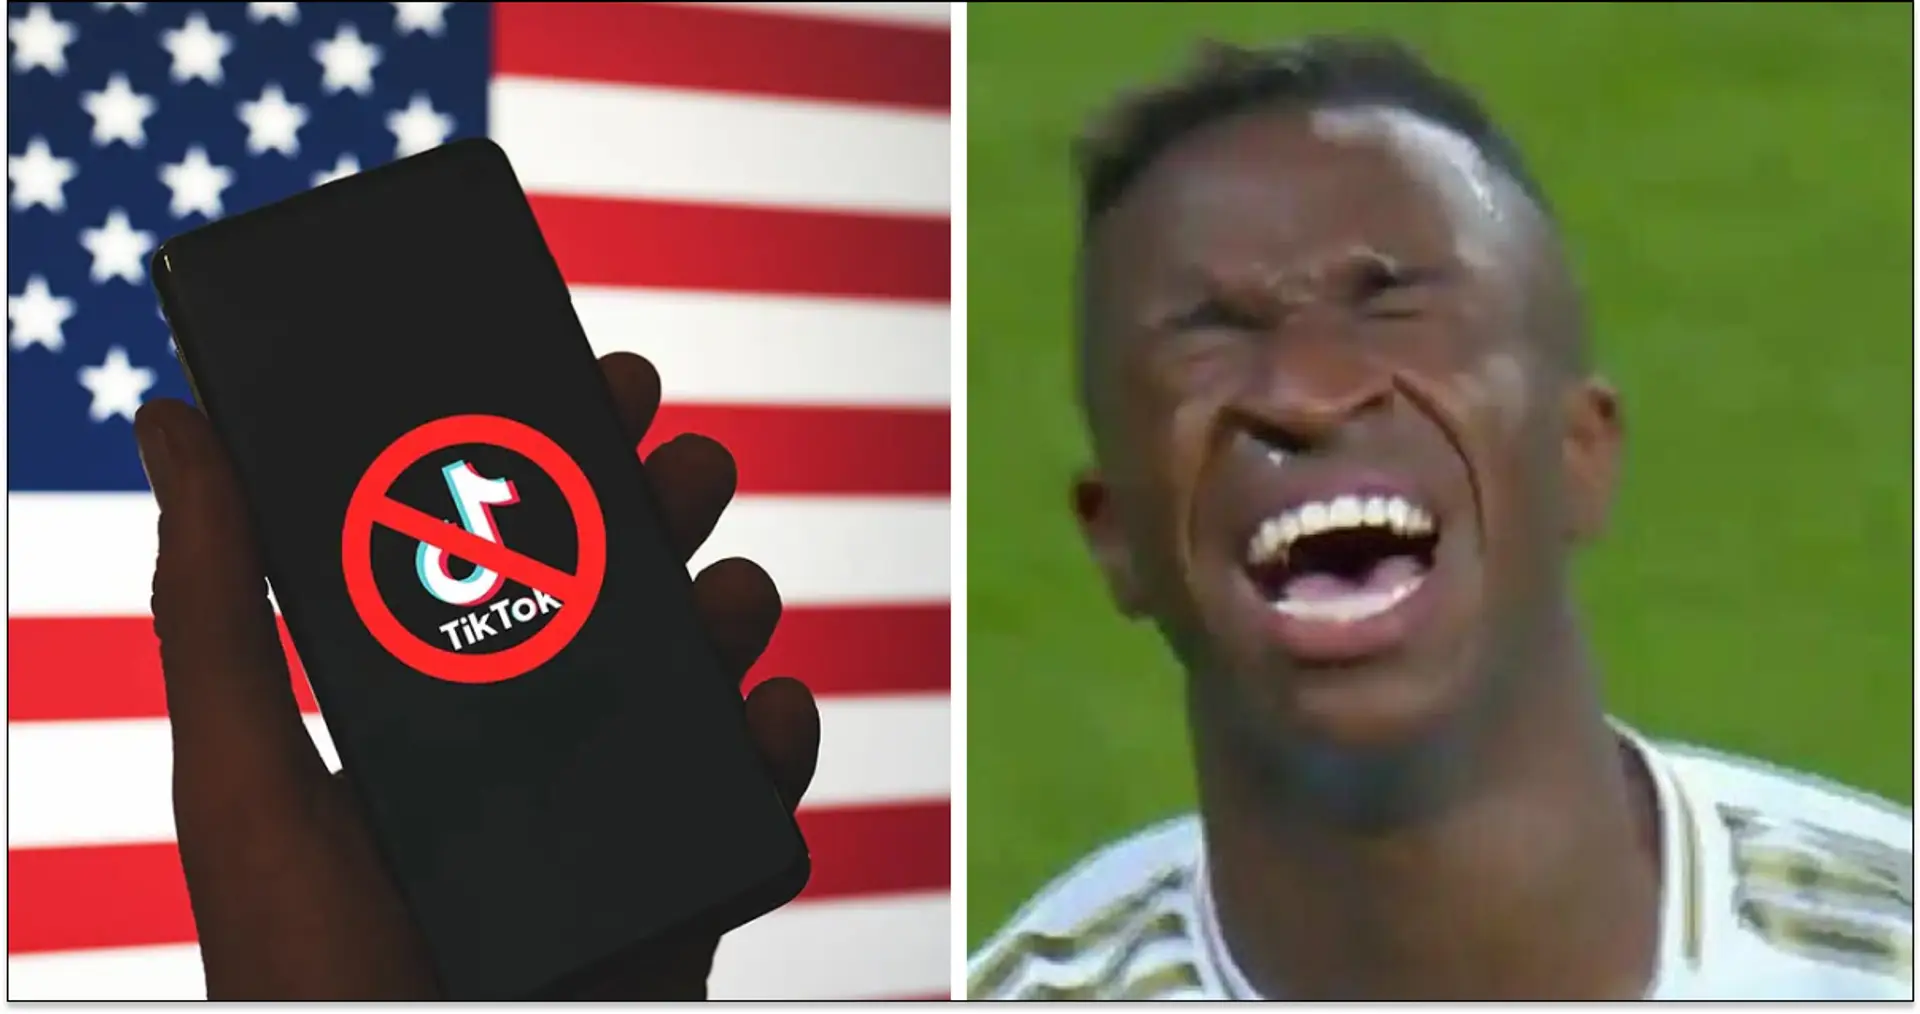 10 most popular SOCCER stars Americans won't see on TikTok as ban looms